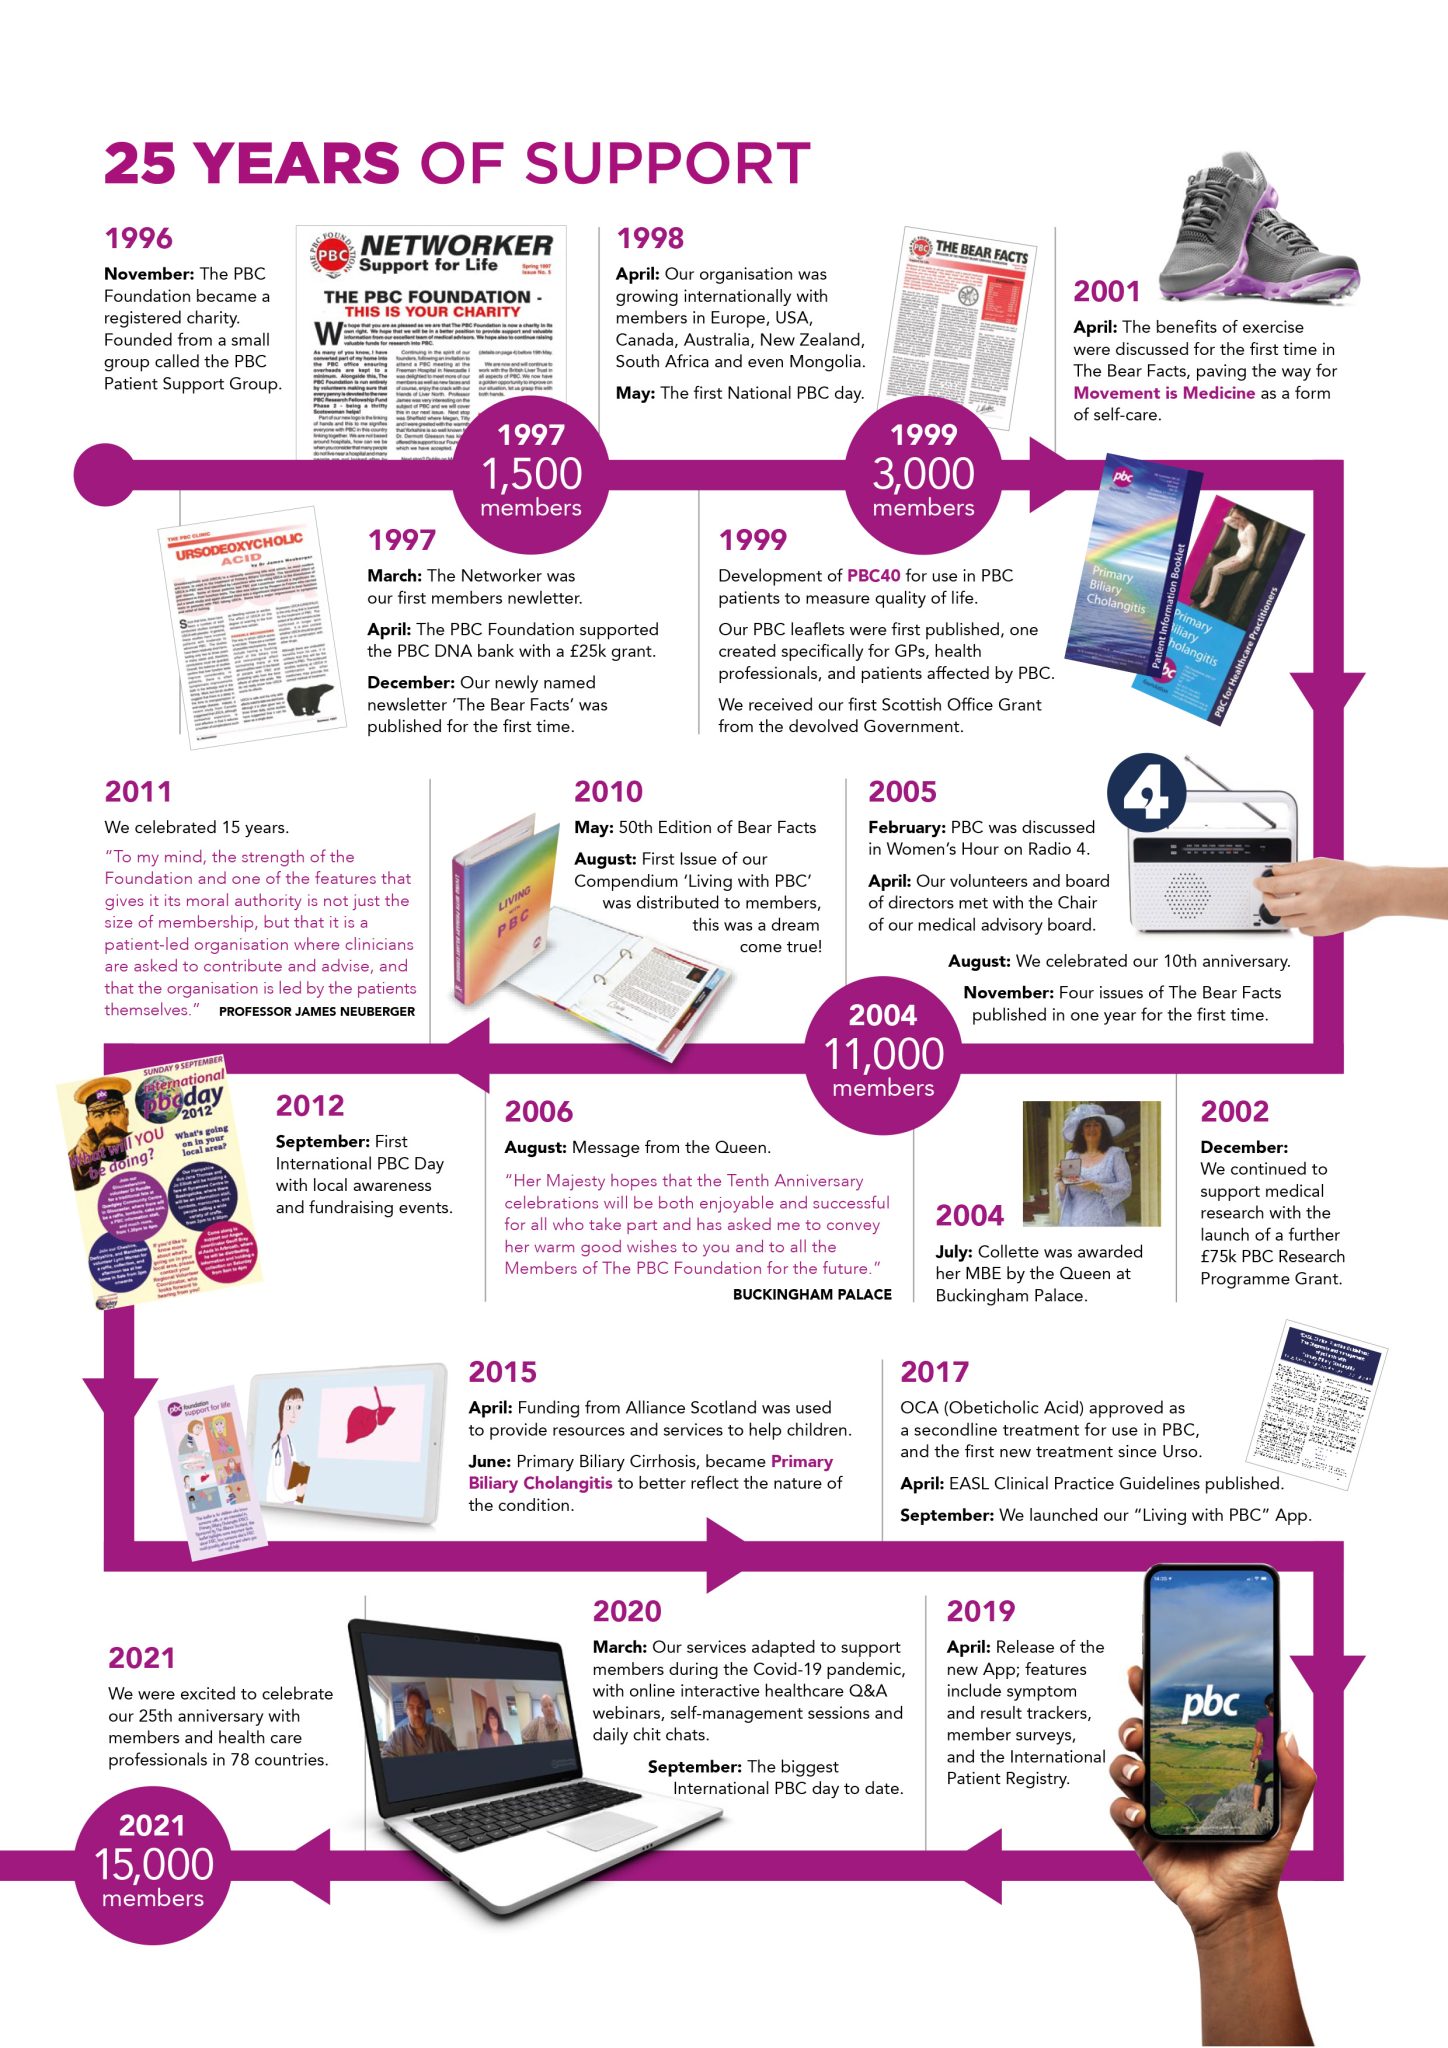 A timeline showing 25 years of the PBC Foundation